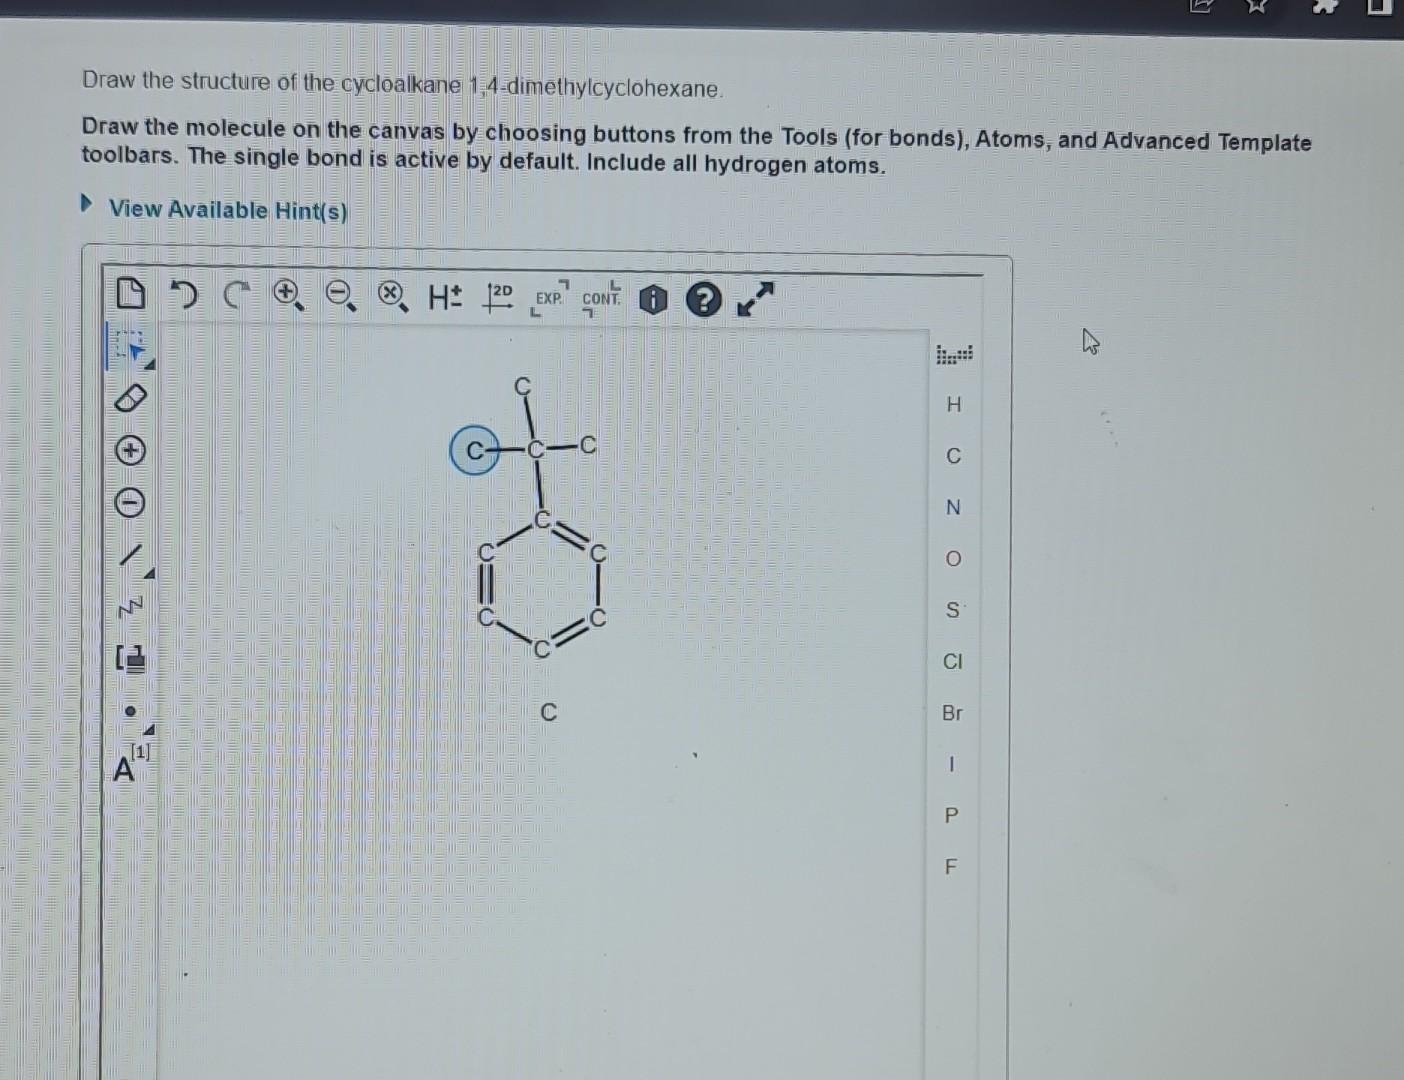 [Solved] Draw the structure of the cycloalkane 1,4dim